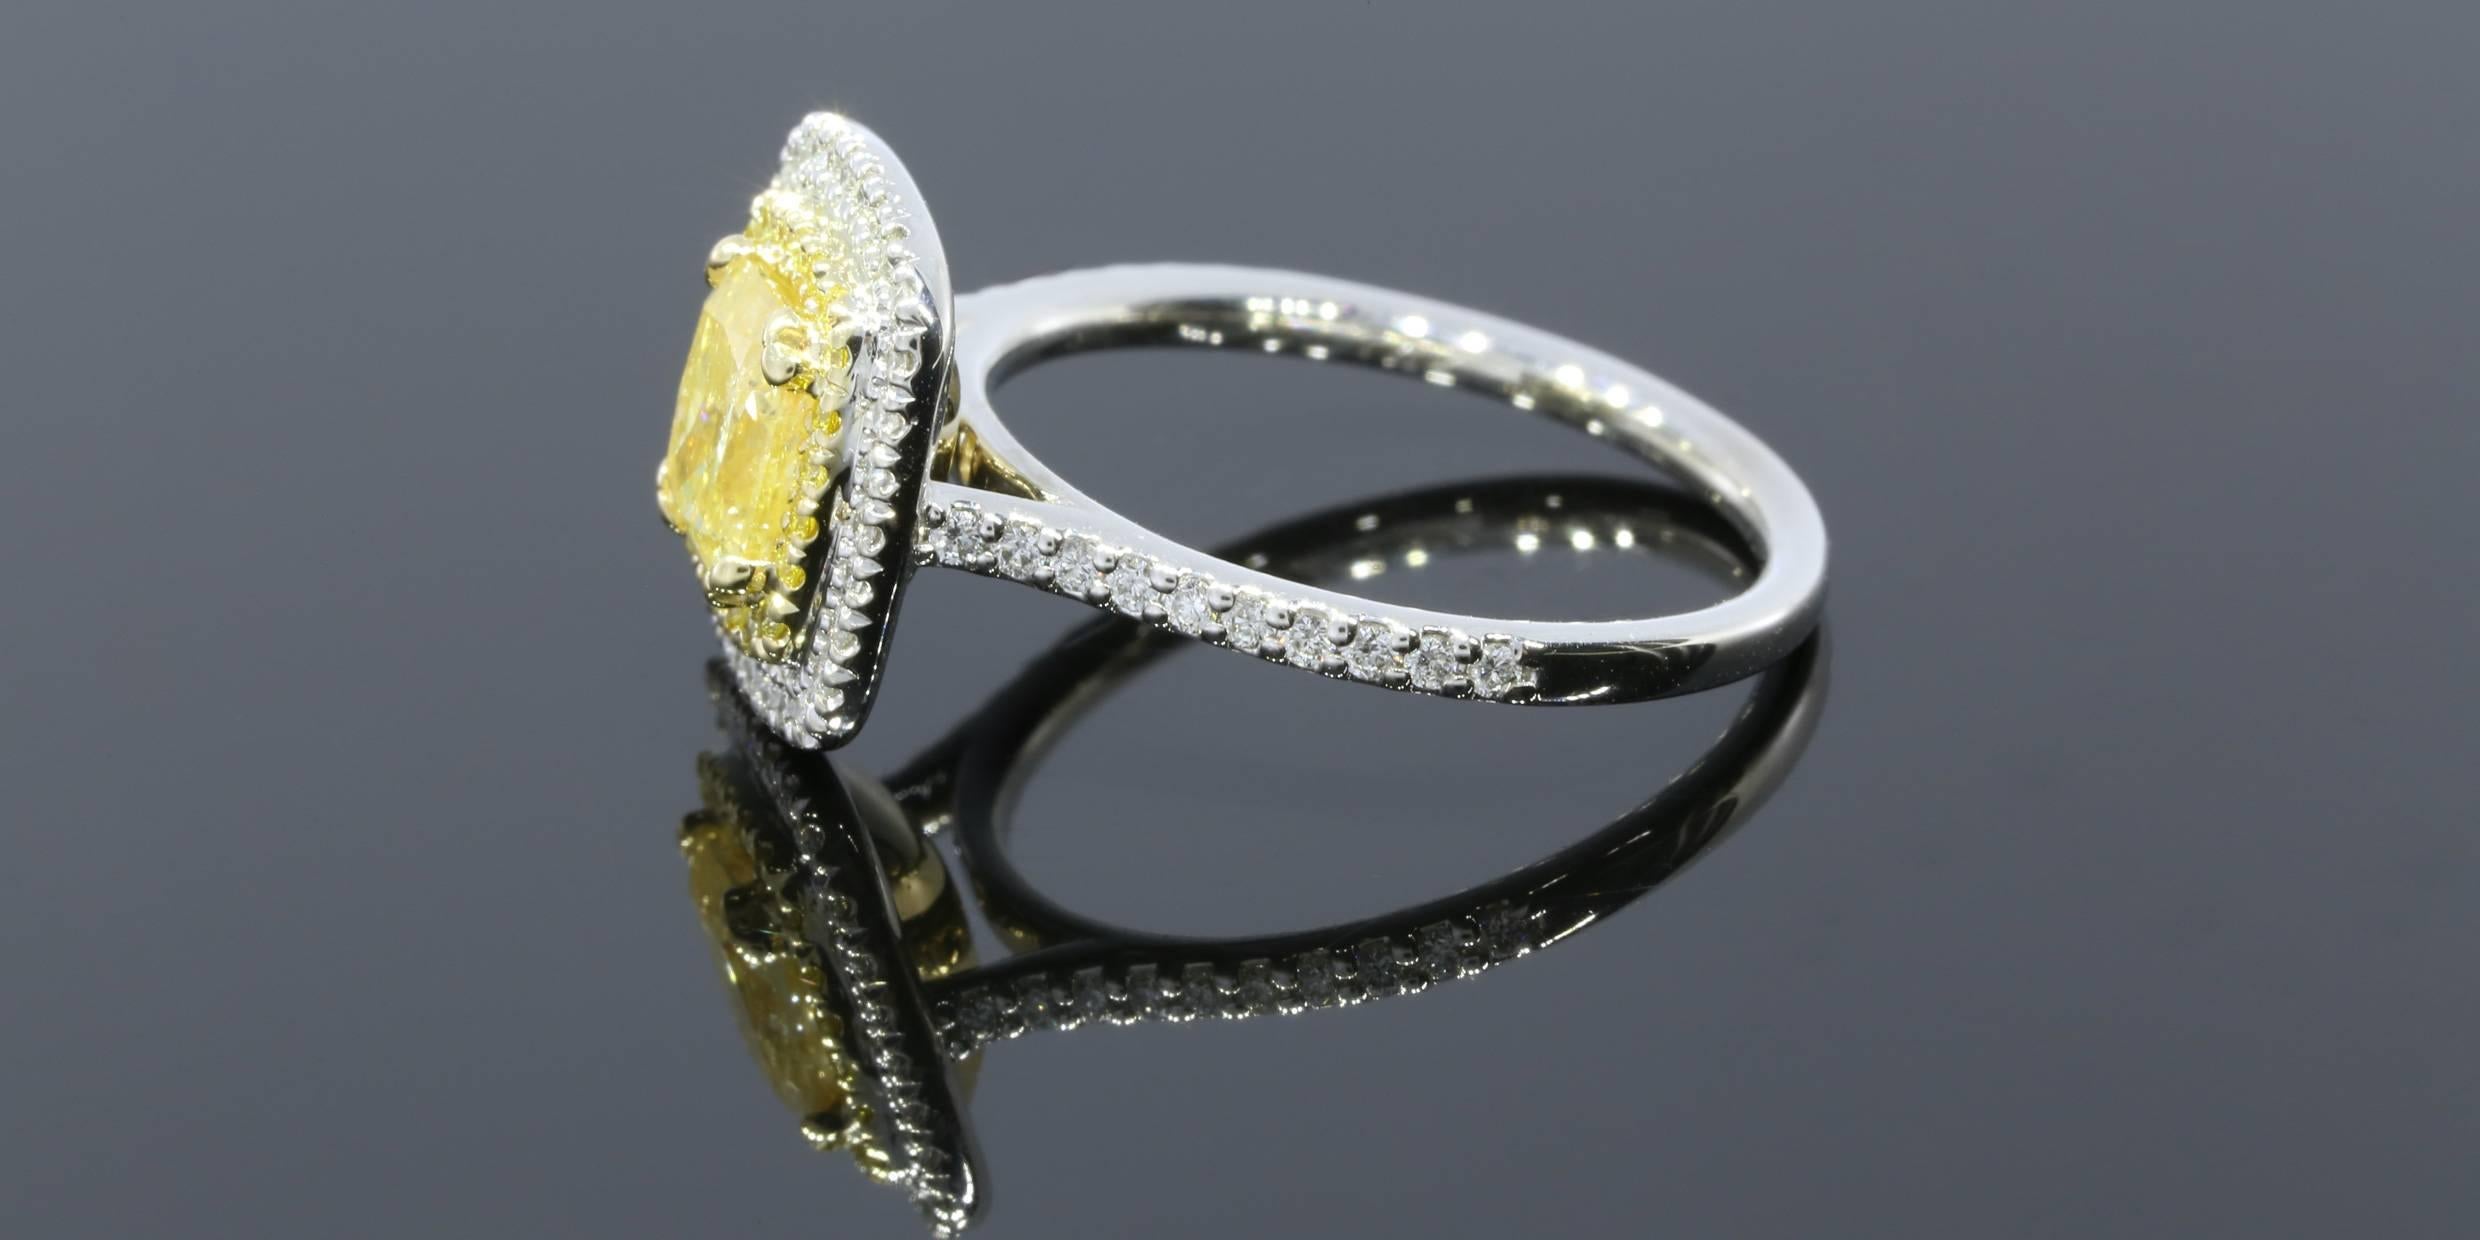 This gorgeous halo engagement ring features an absolutely stunning 1.12 carat fancy yellow, cushion brilliant cut center diamond that is set in a yellow gold, split prong head. This center diamond has a GIA Color Diamond Certification & grades as I1